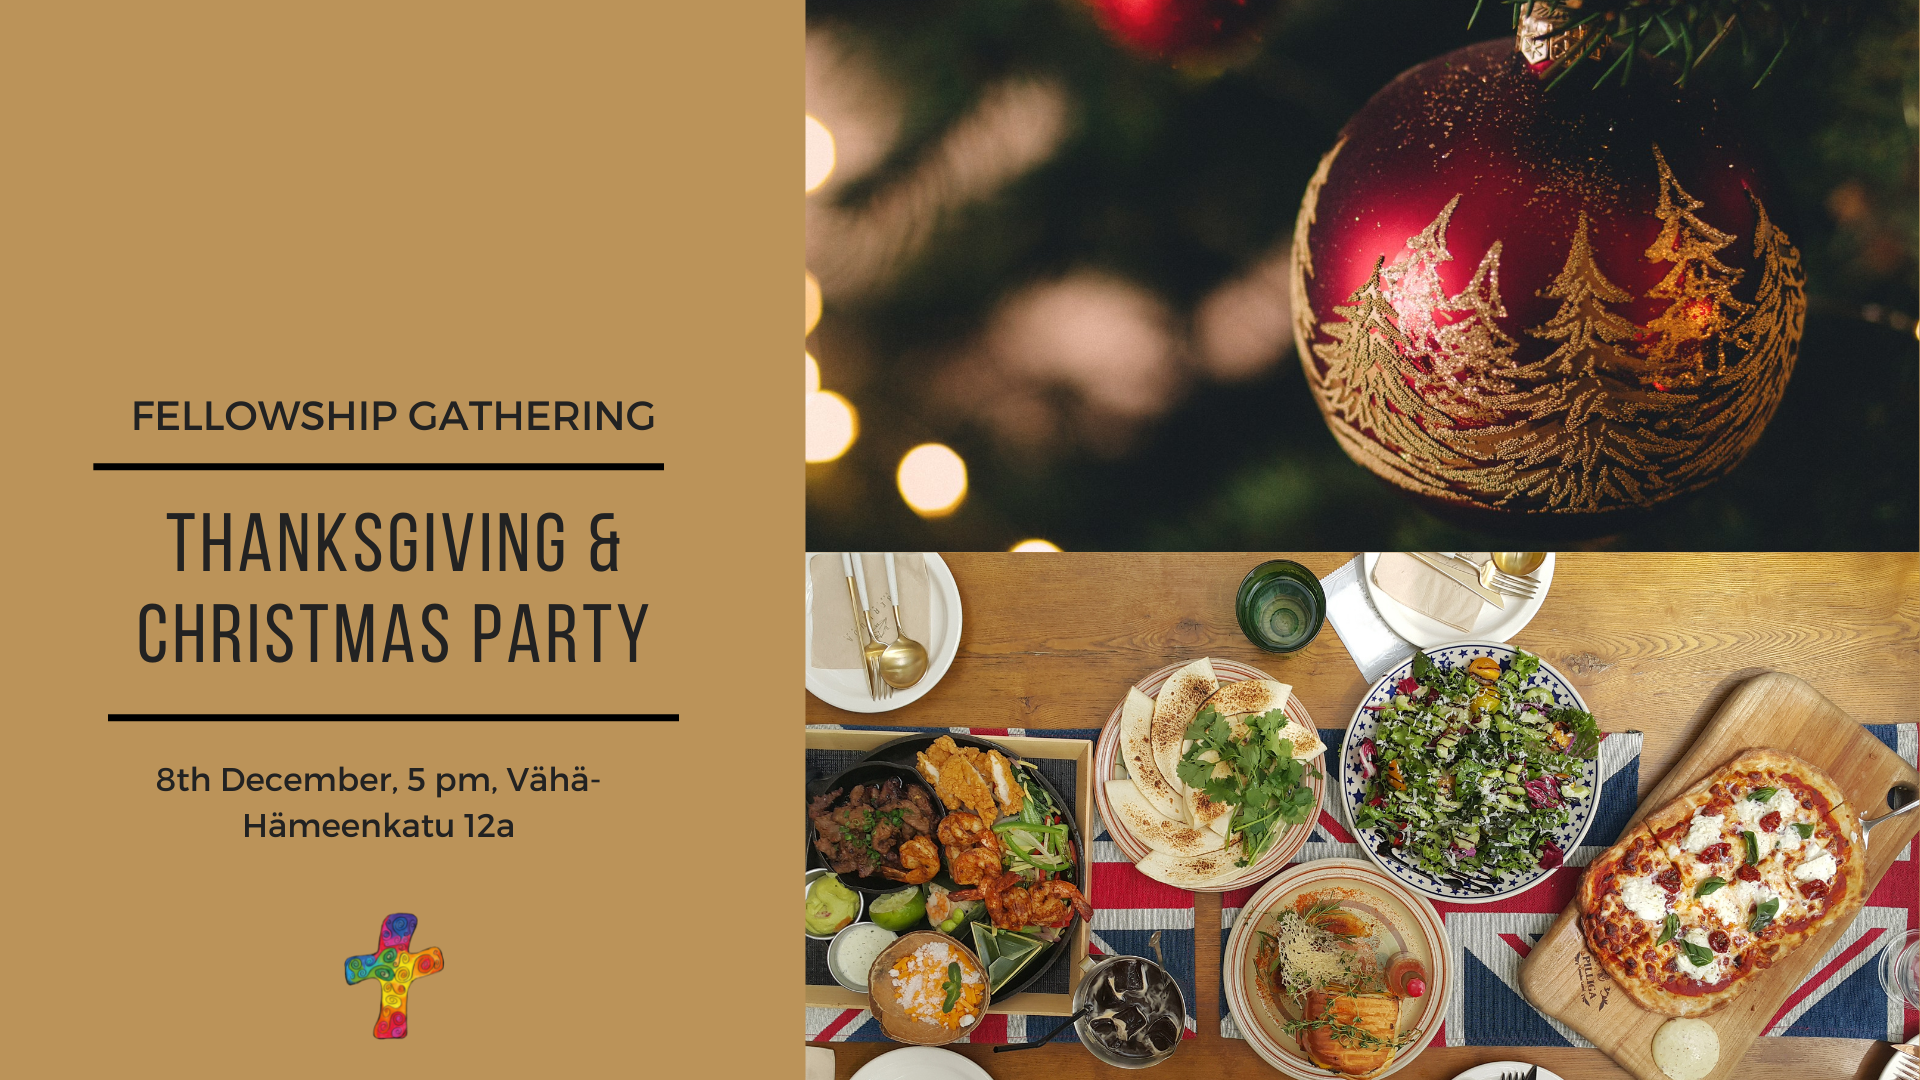 Fellowship Gathering – Thanksgiving and Christmas party